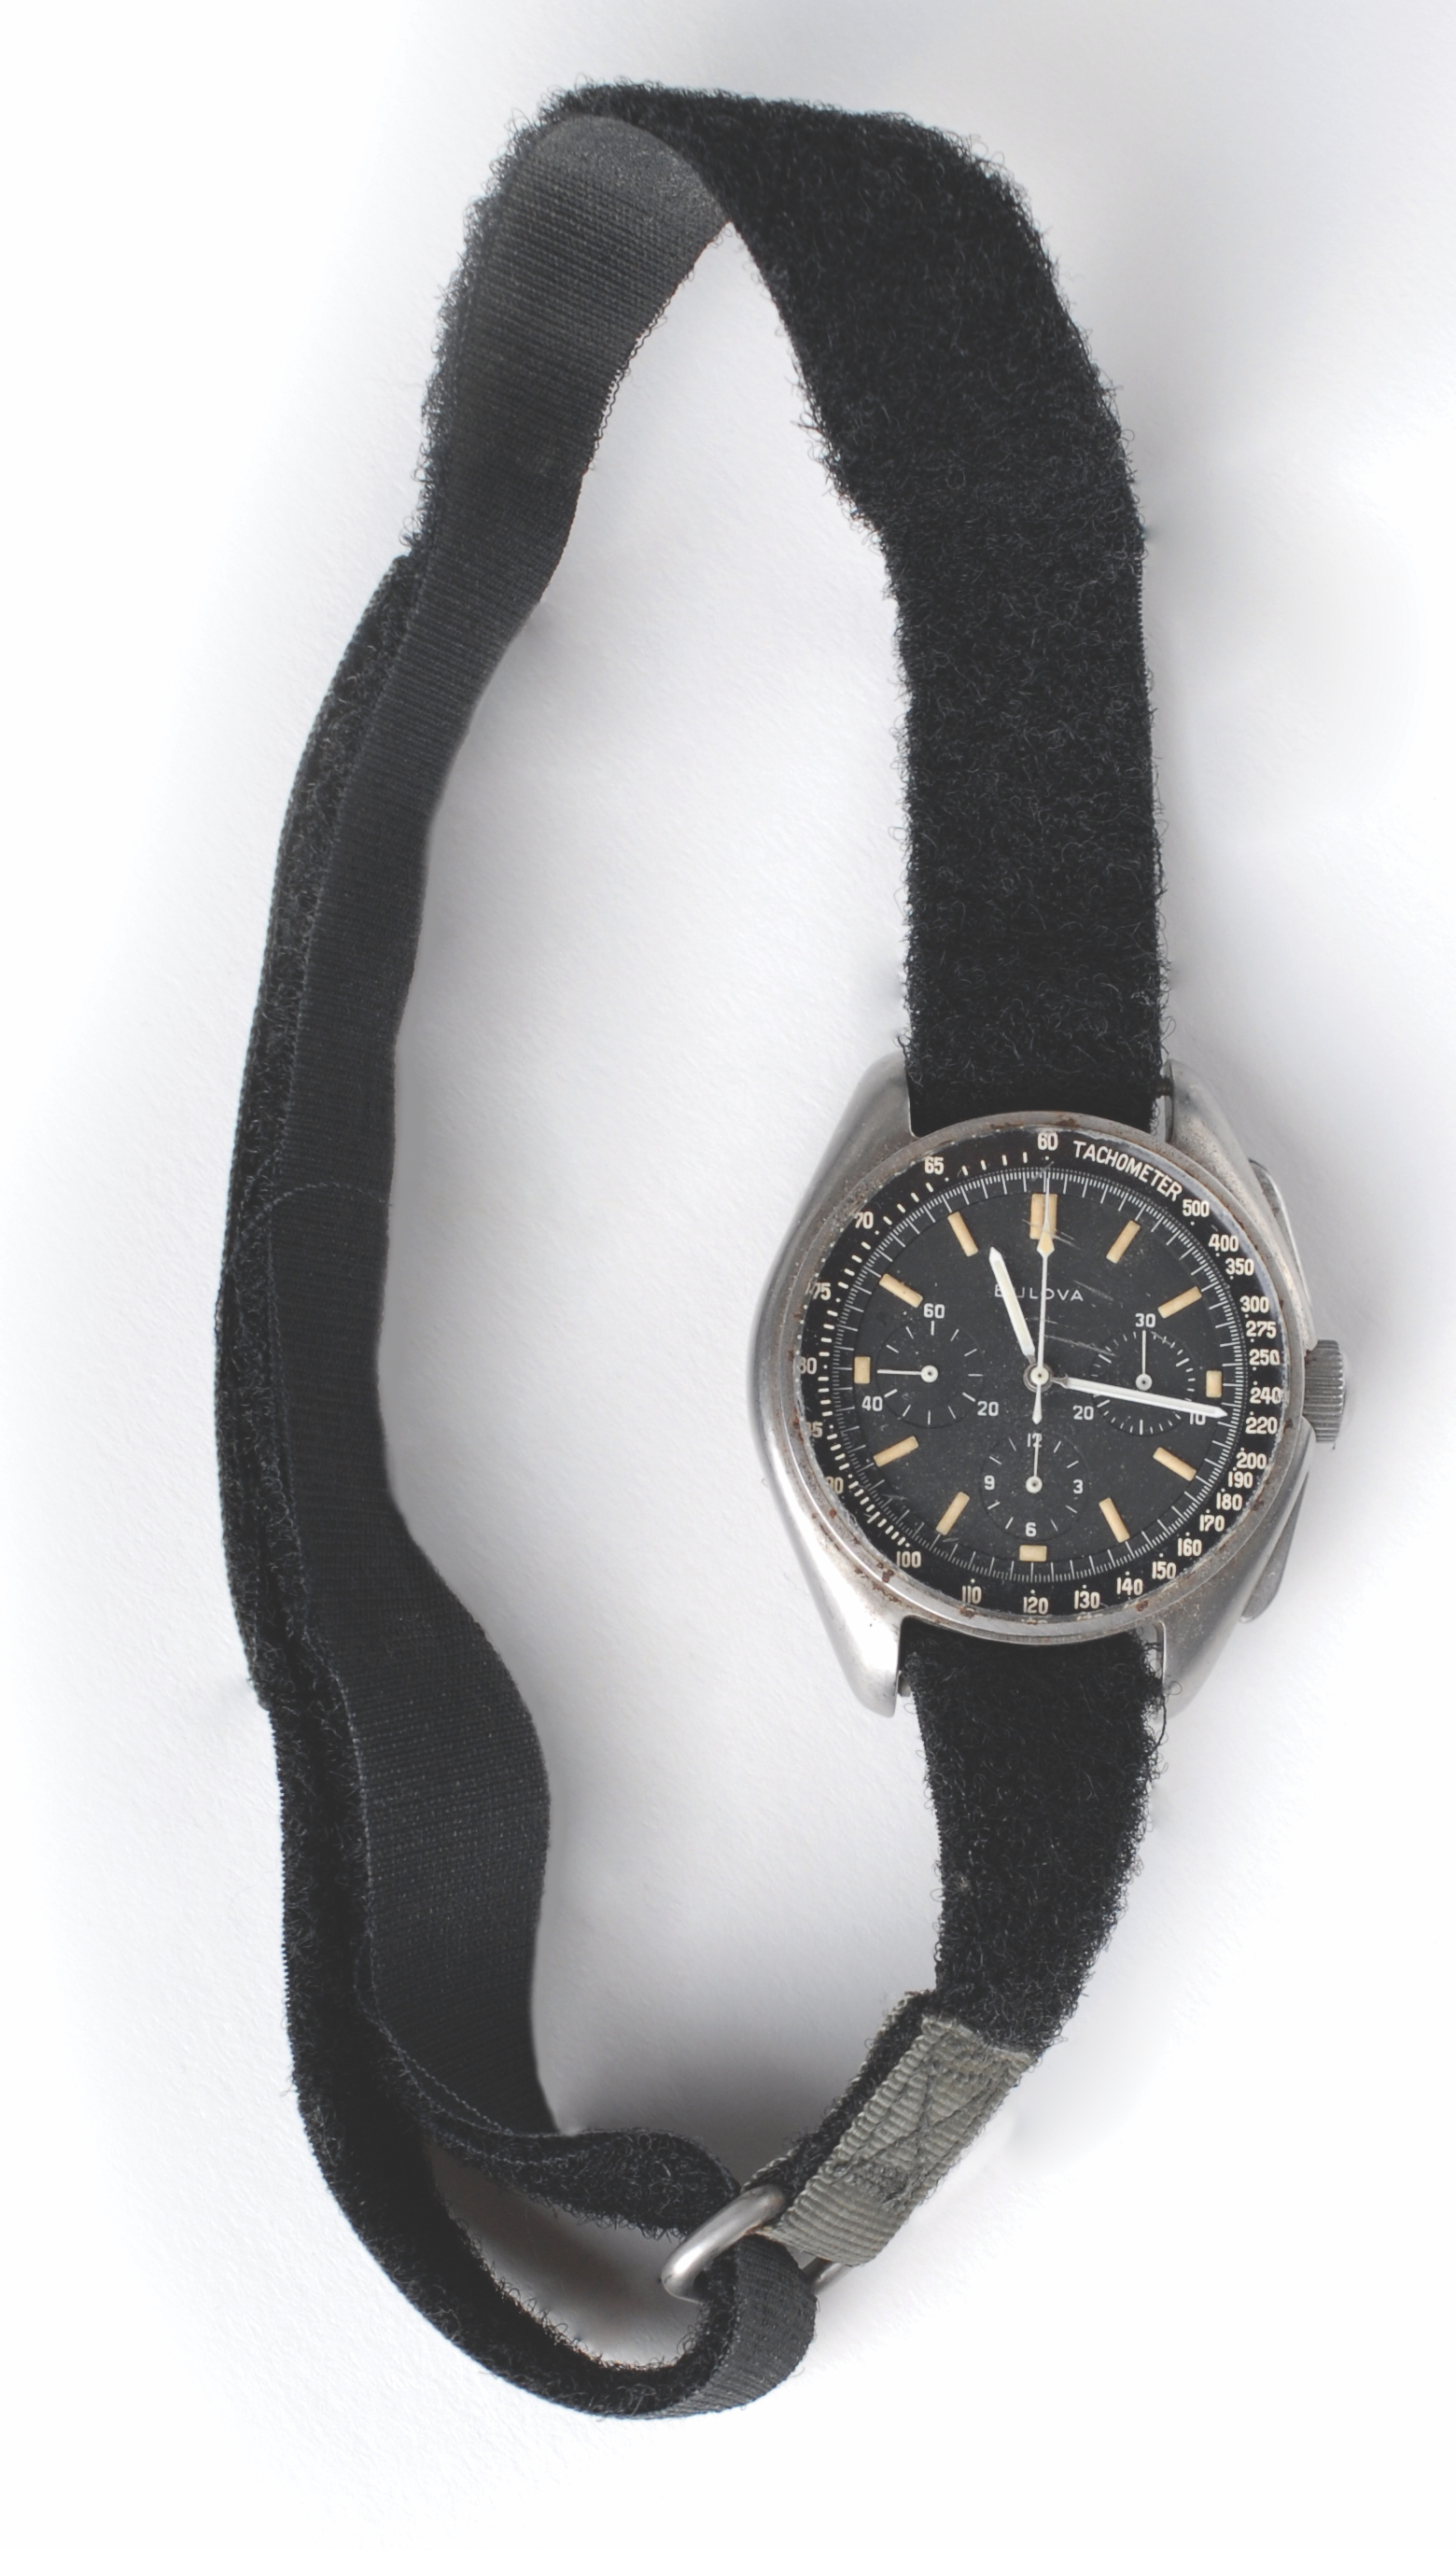 The Bulova chronograph that astronaut David Scott wore on the surface of the moon during the Apollo 15 mission, shown in full, with the fuzzy side of the velcro strap visible.